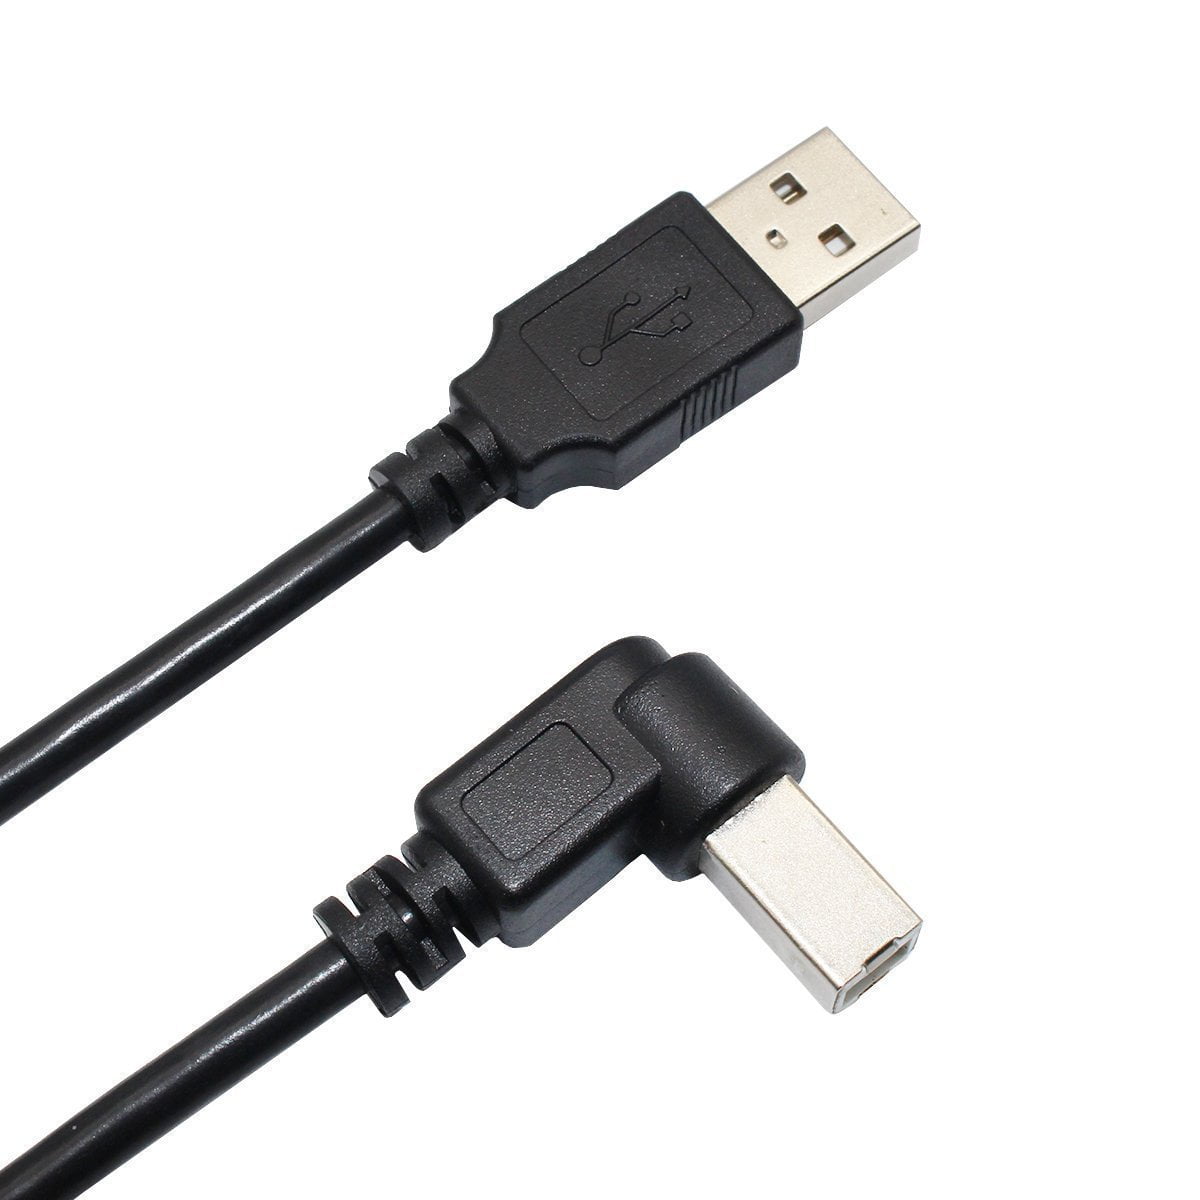 B2G1 Free For HP PSC All-in-One Printer 6FT USB 2.0 Premium Cable Cord A-B NEW 